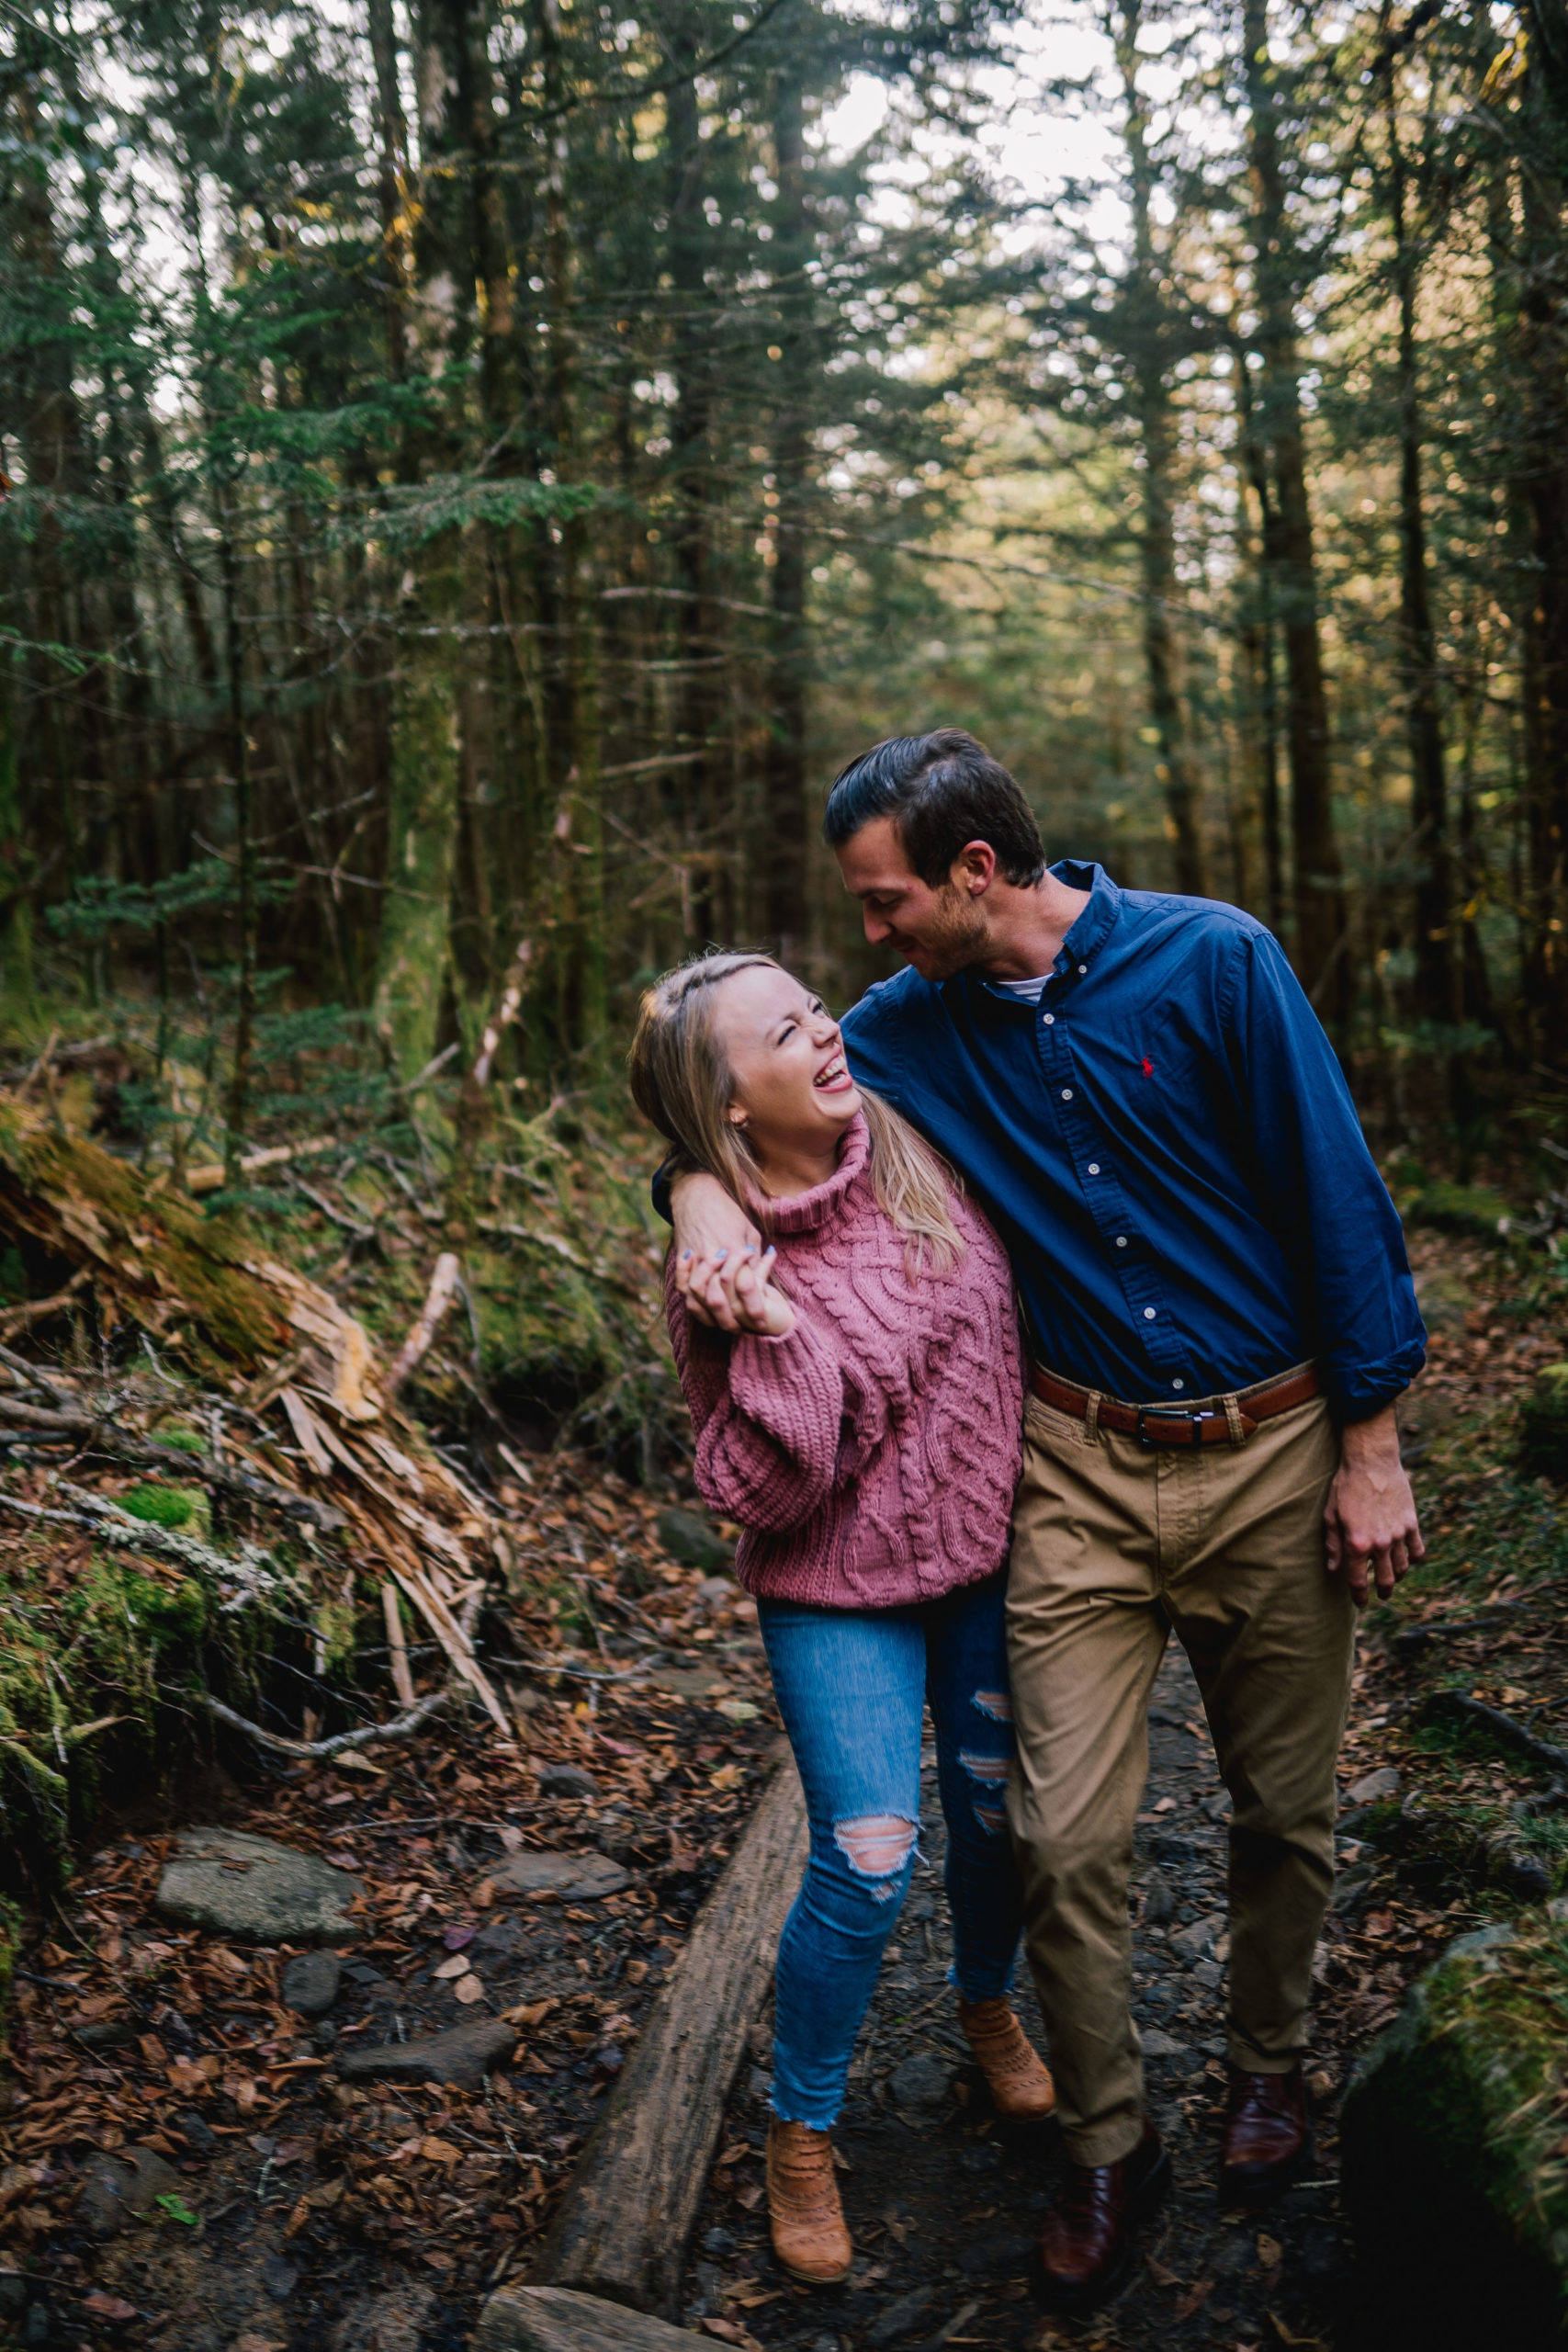 couple laughing as they walk down a dirt trail while the man holds the woman around the shoulder, casual winter engagement photo outfits